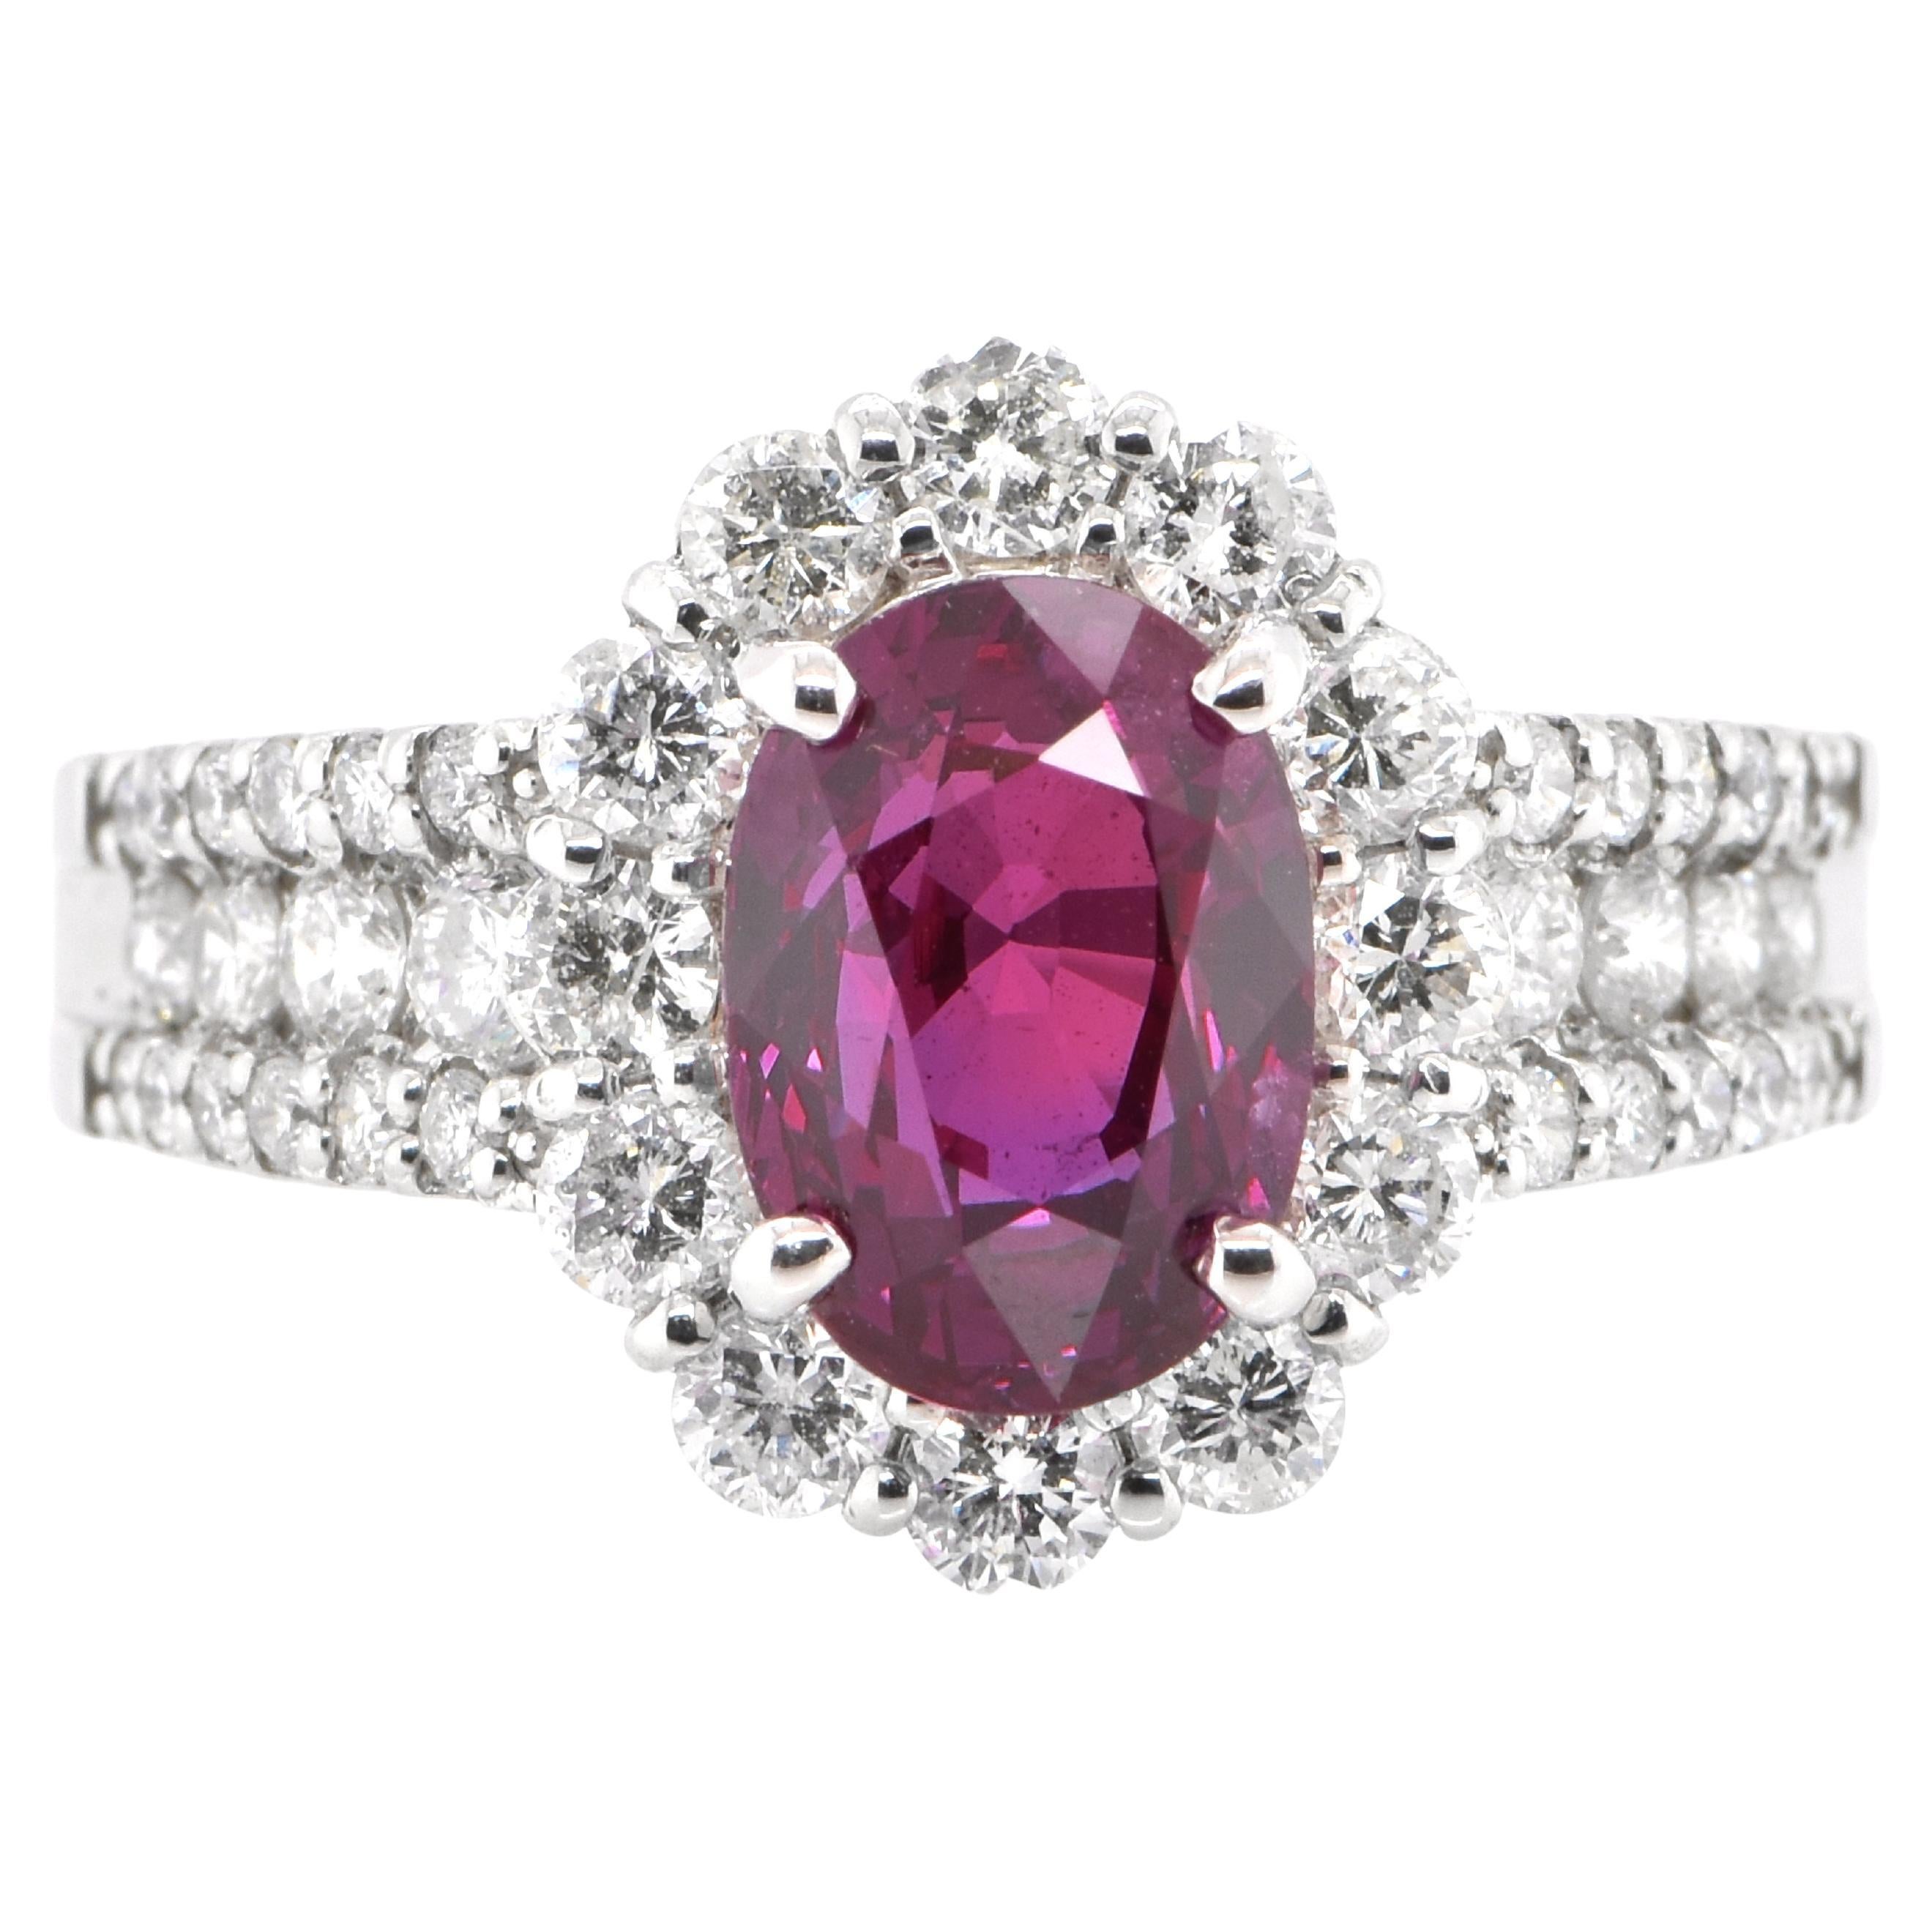 GIA Certified 2.69 Carat, Untreated, Mozambican Ruby and Diamond Set in Platinum